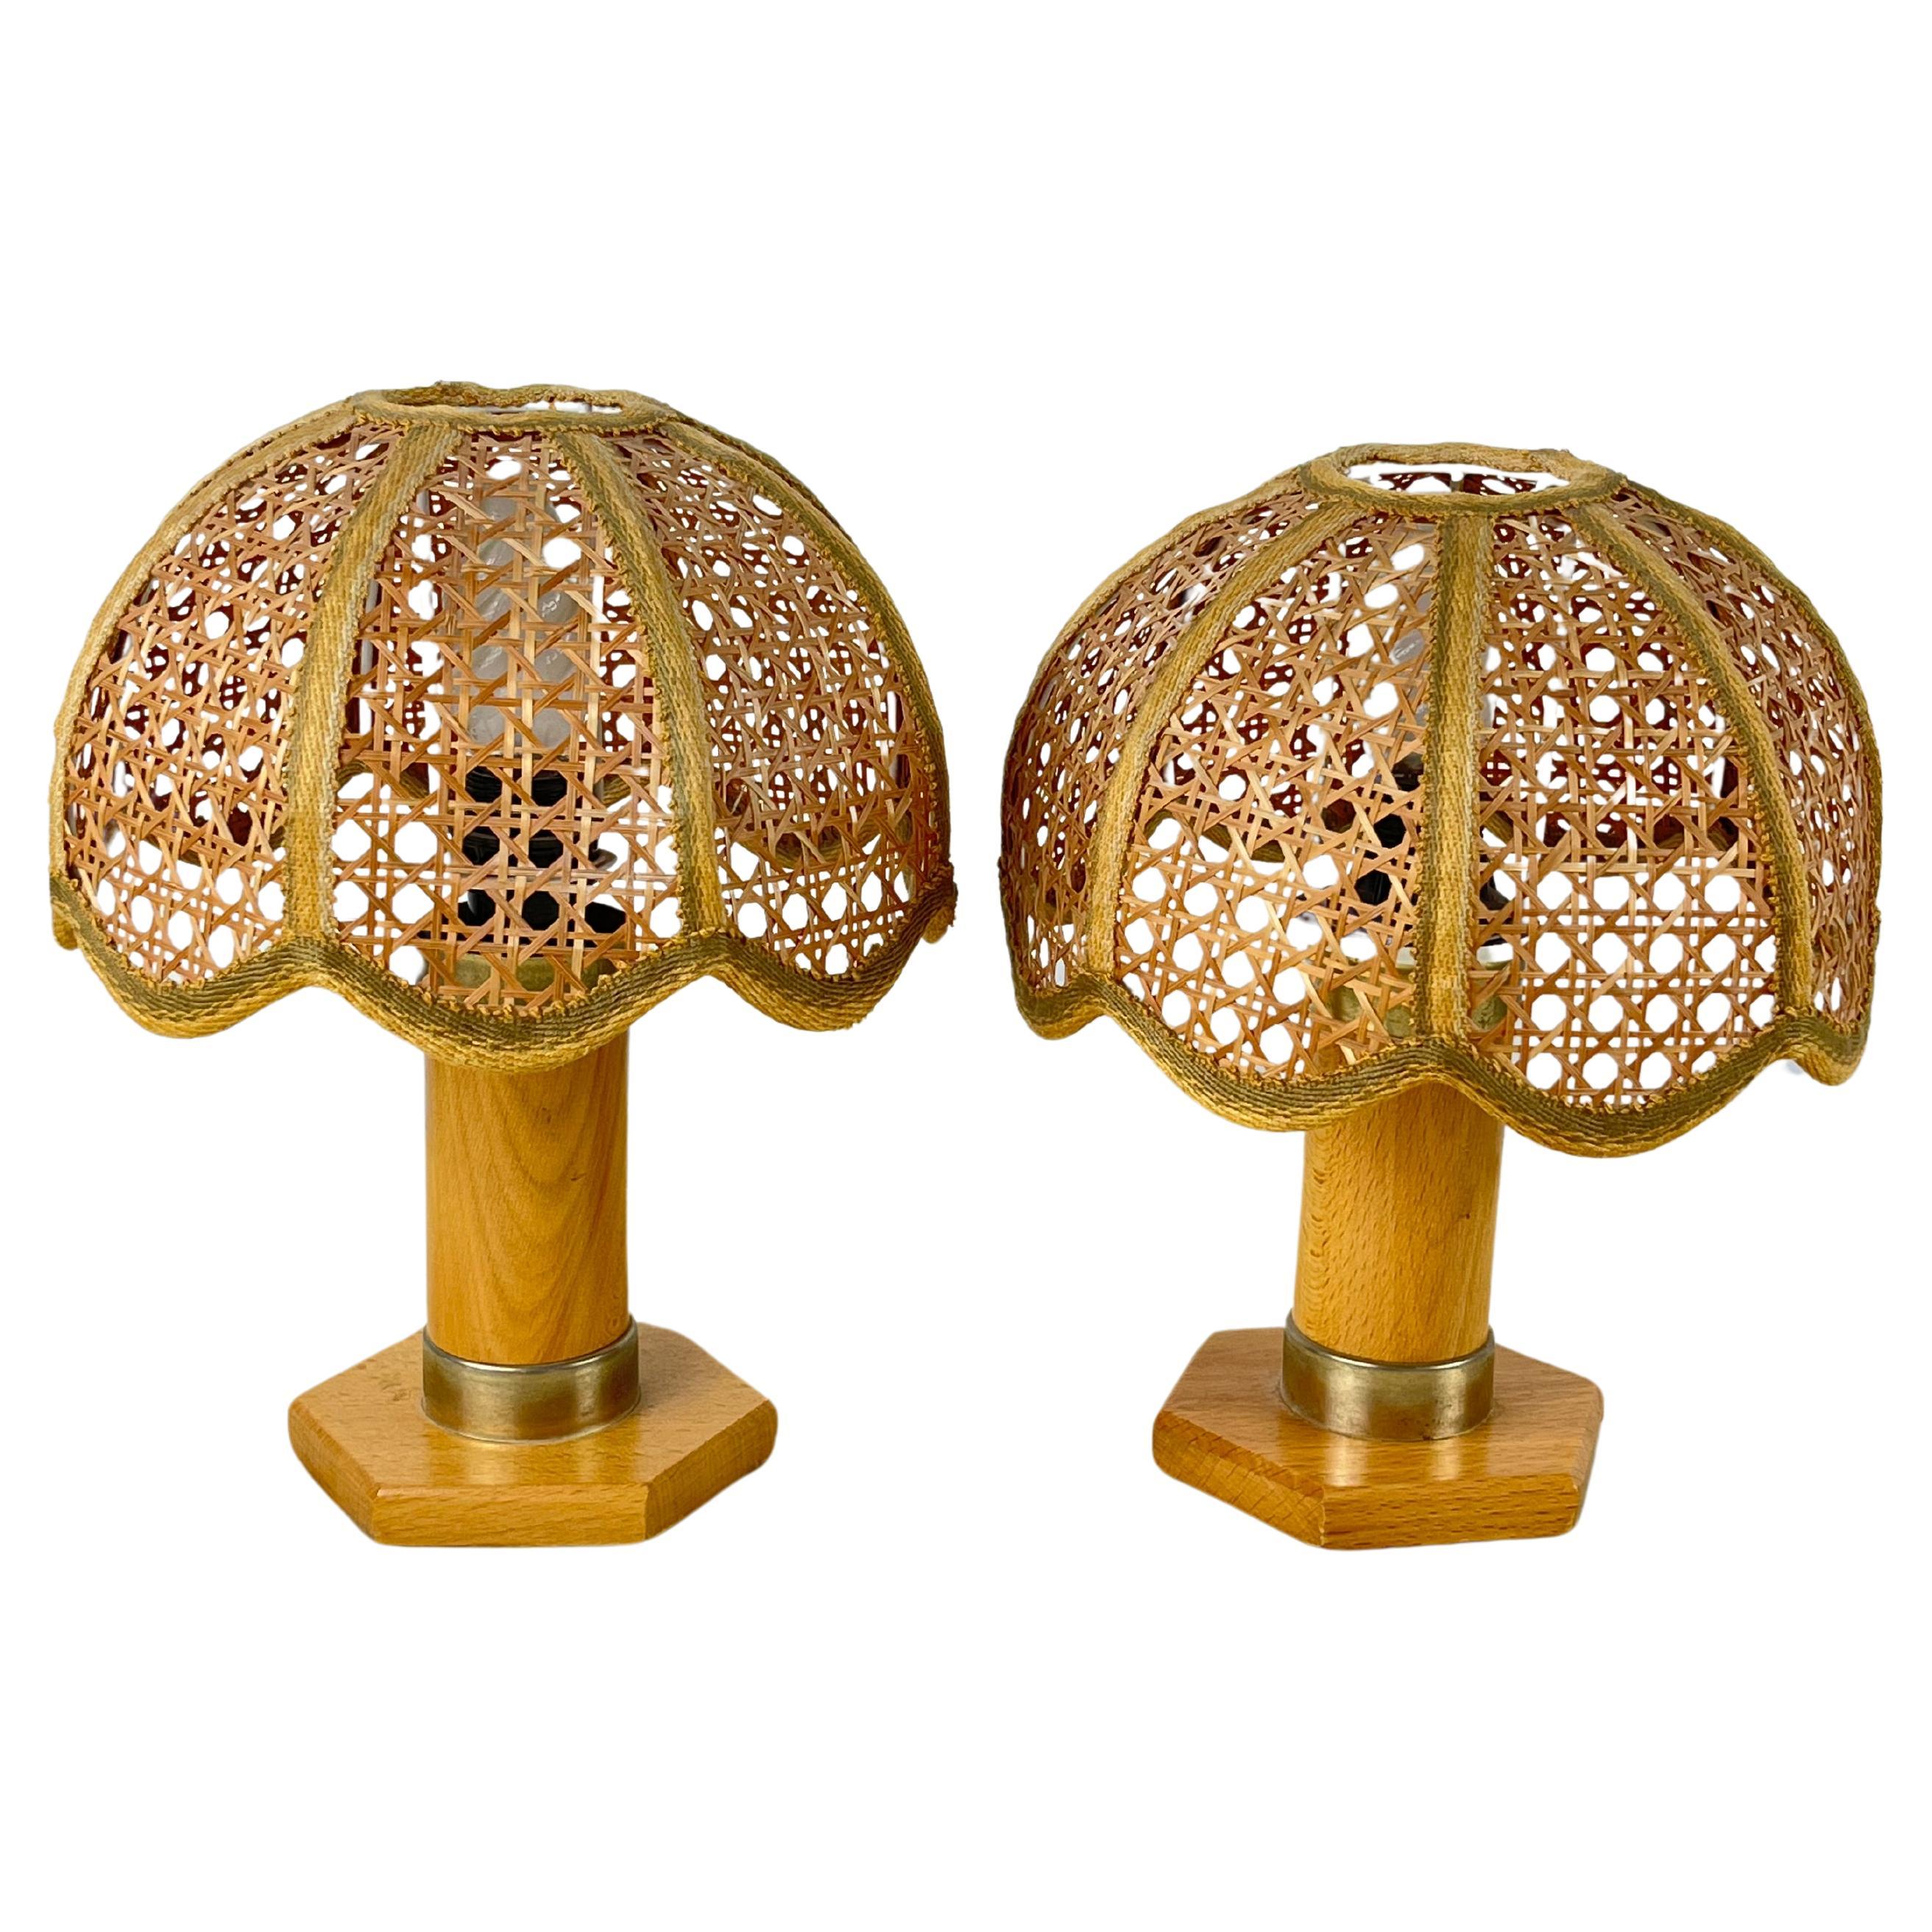 Set of 2 Mid-Century French Riviera Wicker And Rattan Table Lamps 1960s For Sale